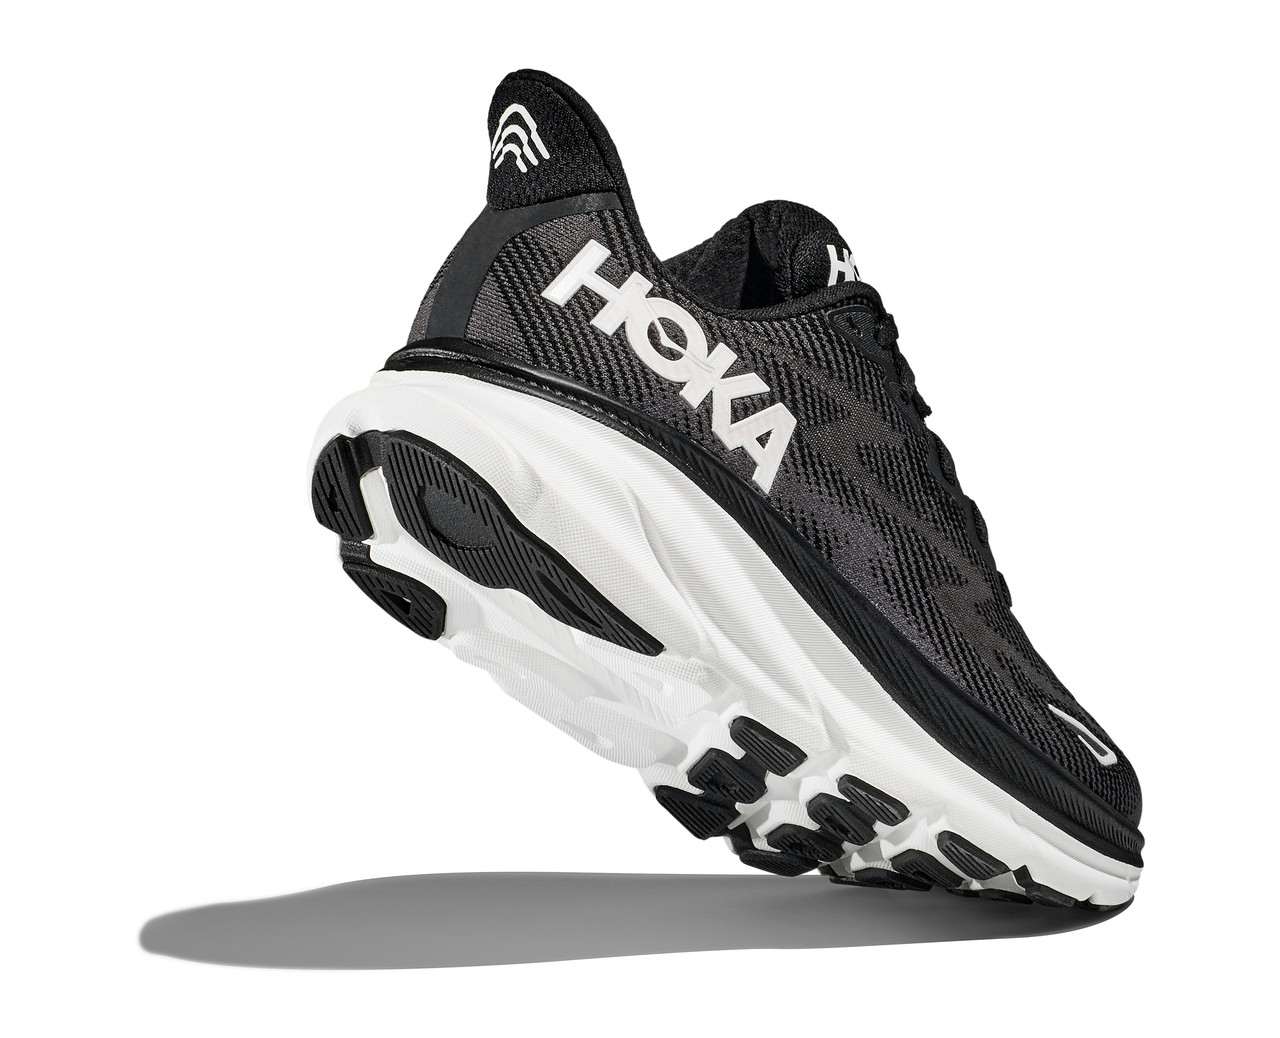 Clifton 9 Road Running Shoes Black/White